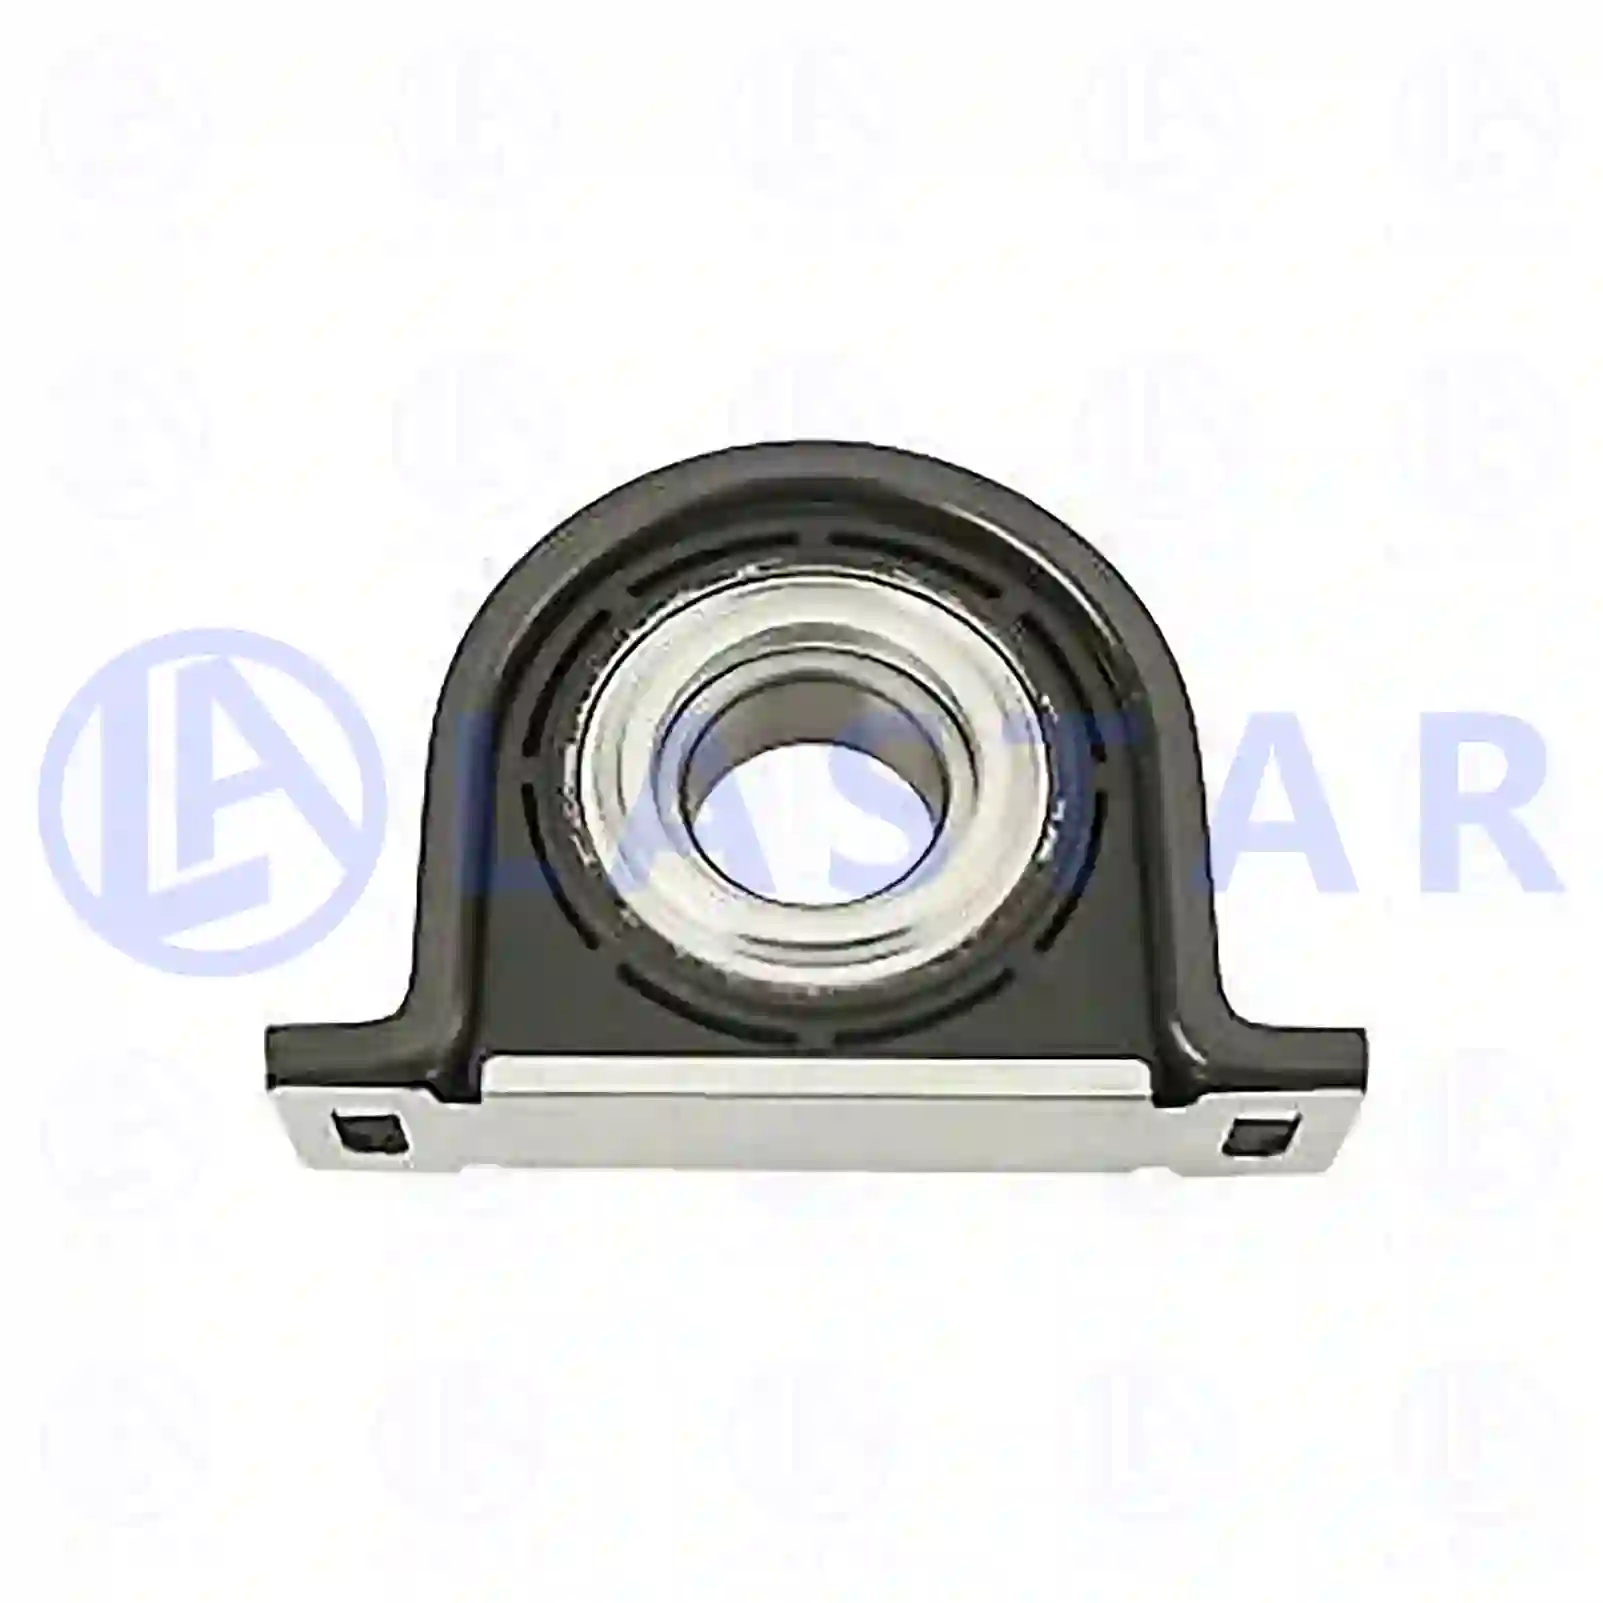 Center bearing, 77734280, 102204, 102204 ||  77734280 Lastar Spare Part | Truck Spare Parts, Auotomotive Spare Parts Center bearing, 77734280, 102204, 102204 ||  77734280 Lastar Spare Part | Truck Spare Parts, Auotomotive Spare Parts